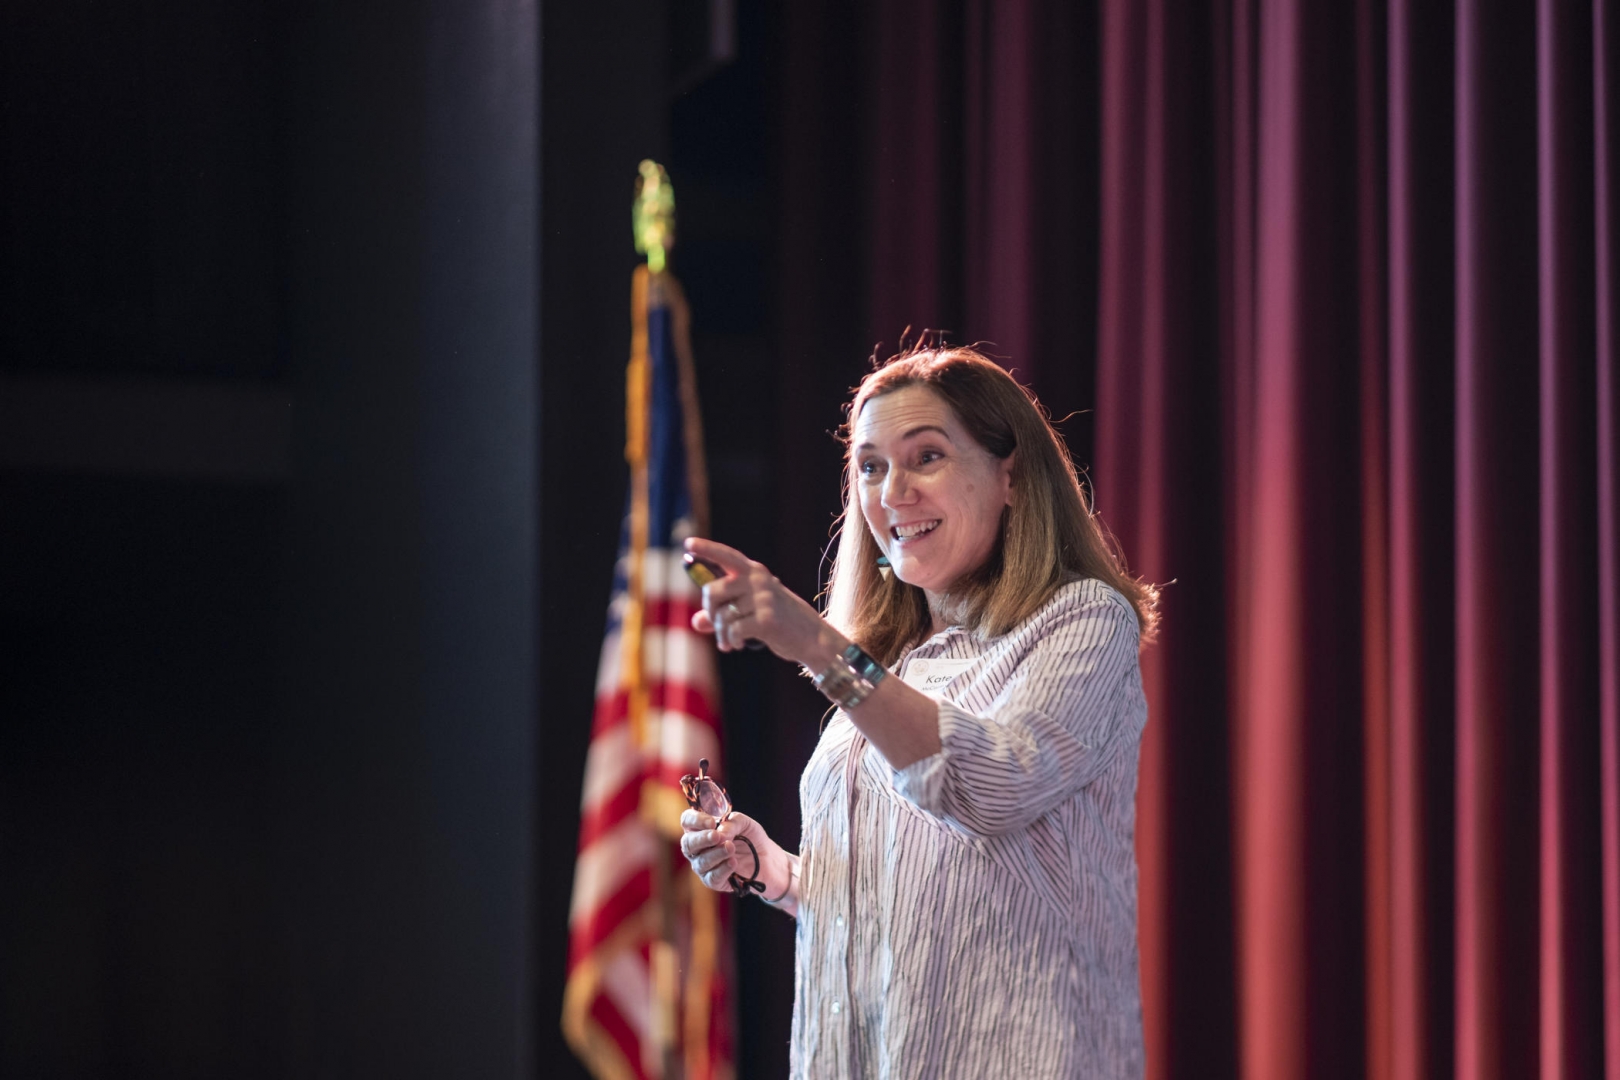 Kate McCarthy smiles and gestures to an audience member as she speaks on stage.